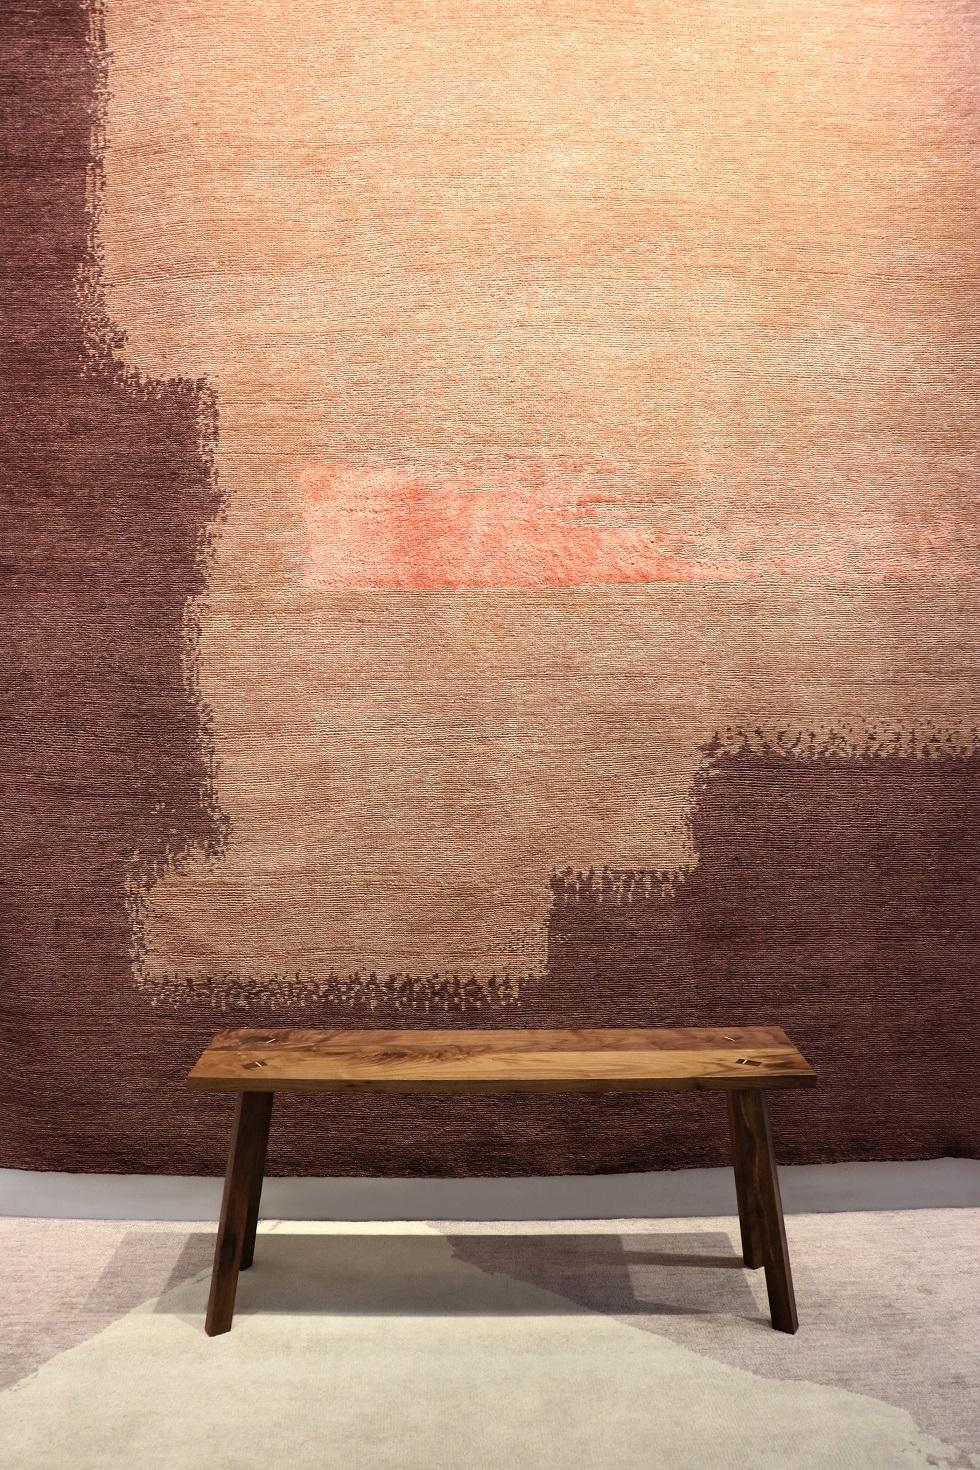 Contemporary Design Rug Burgundy Peach and Coral Hand-Knotted Wool For Sale 2